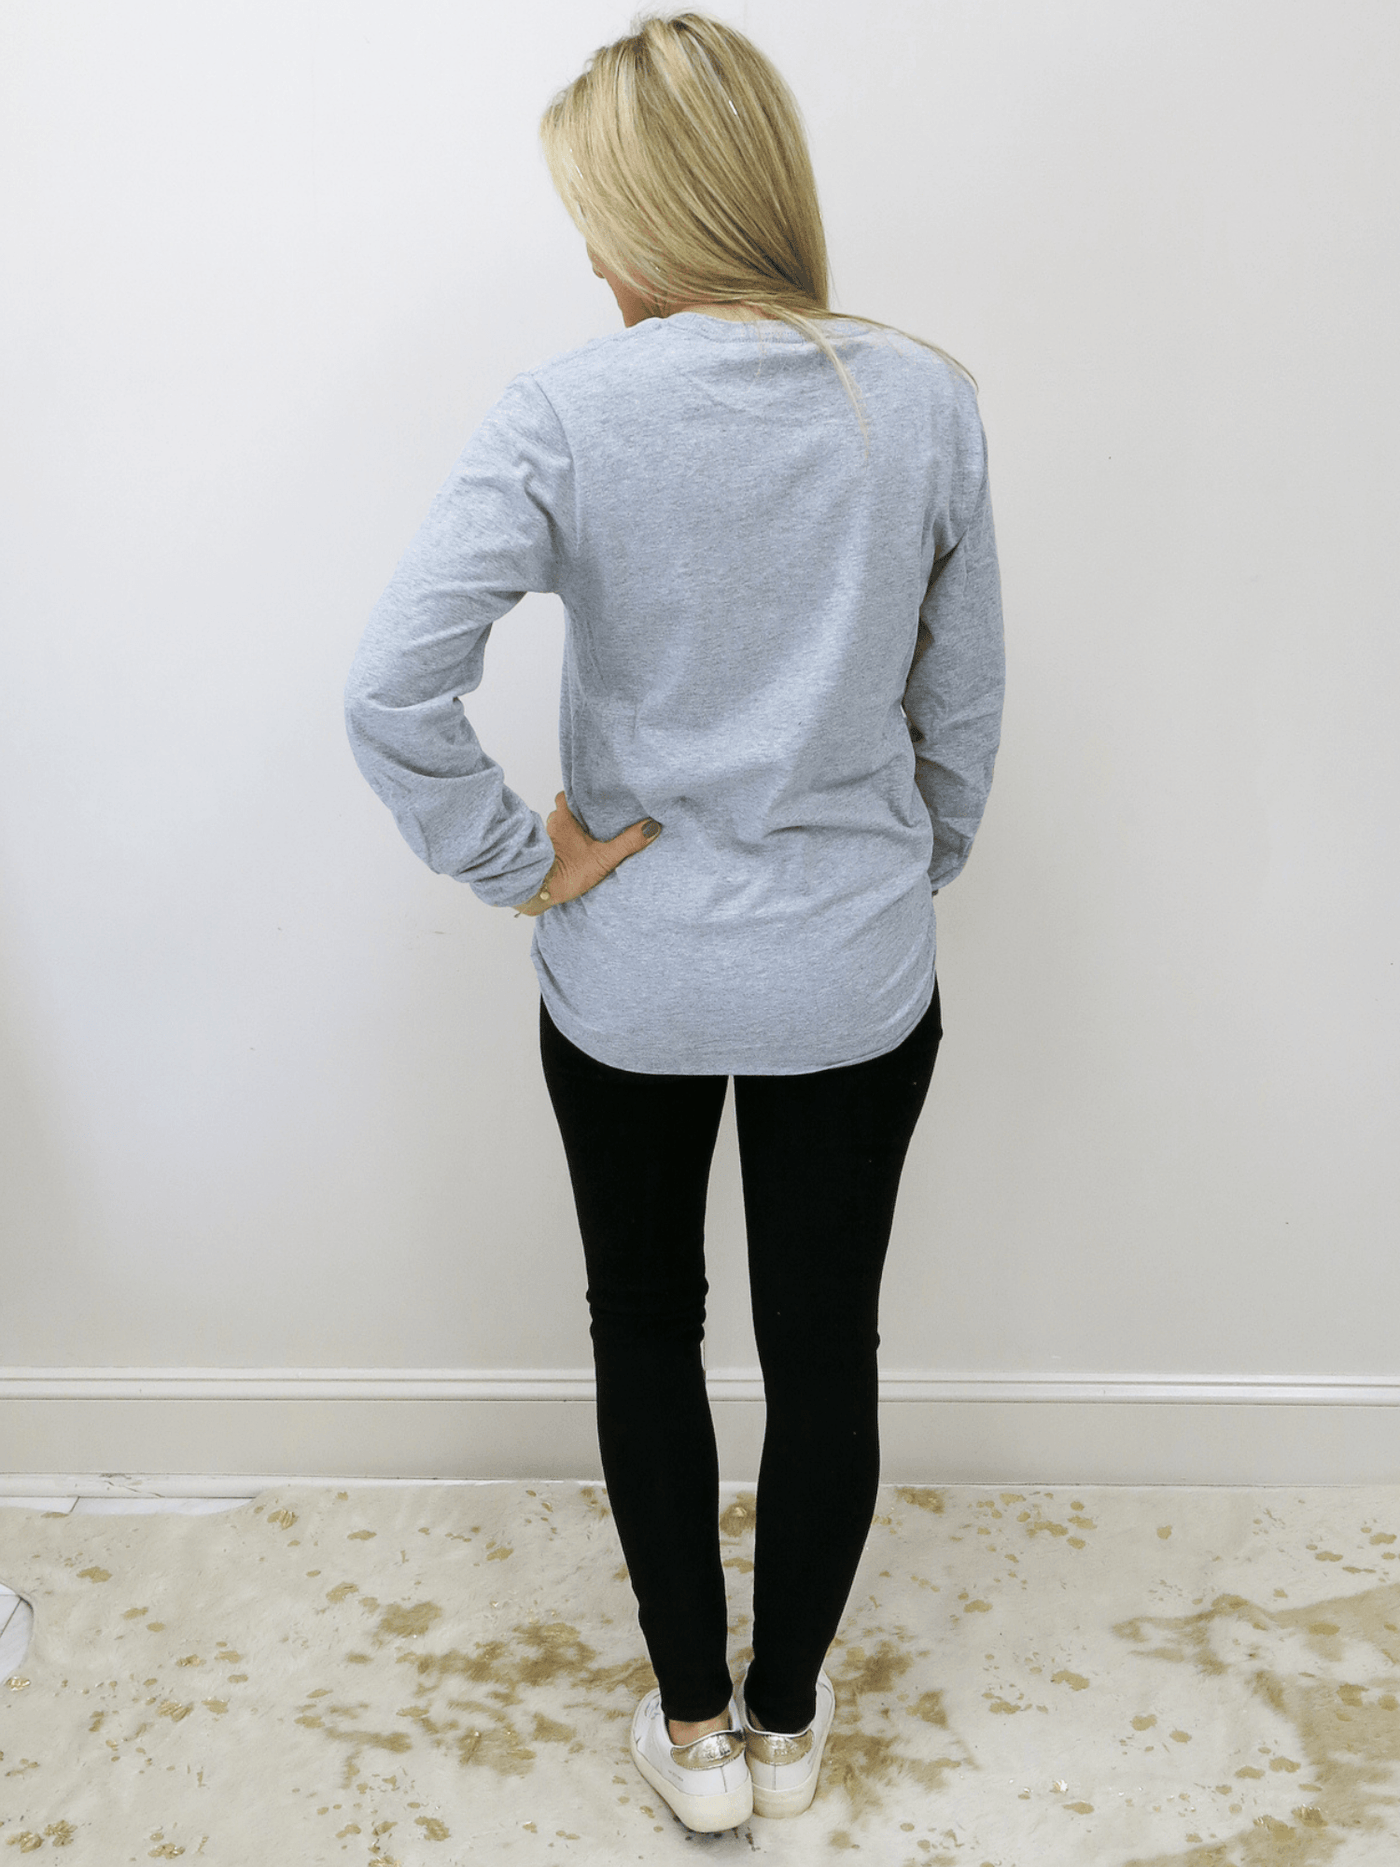 Plain grey back with grey jeans.